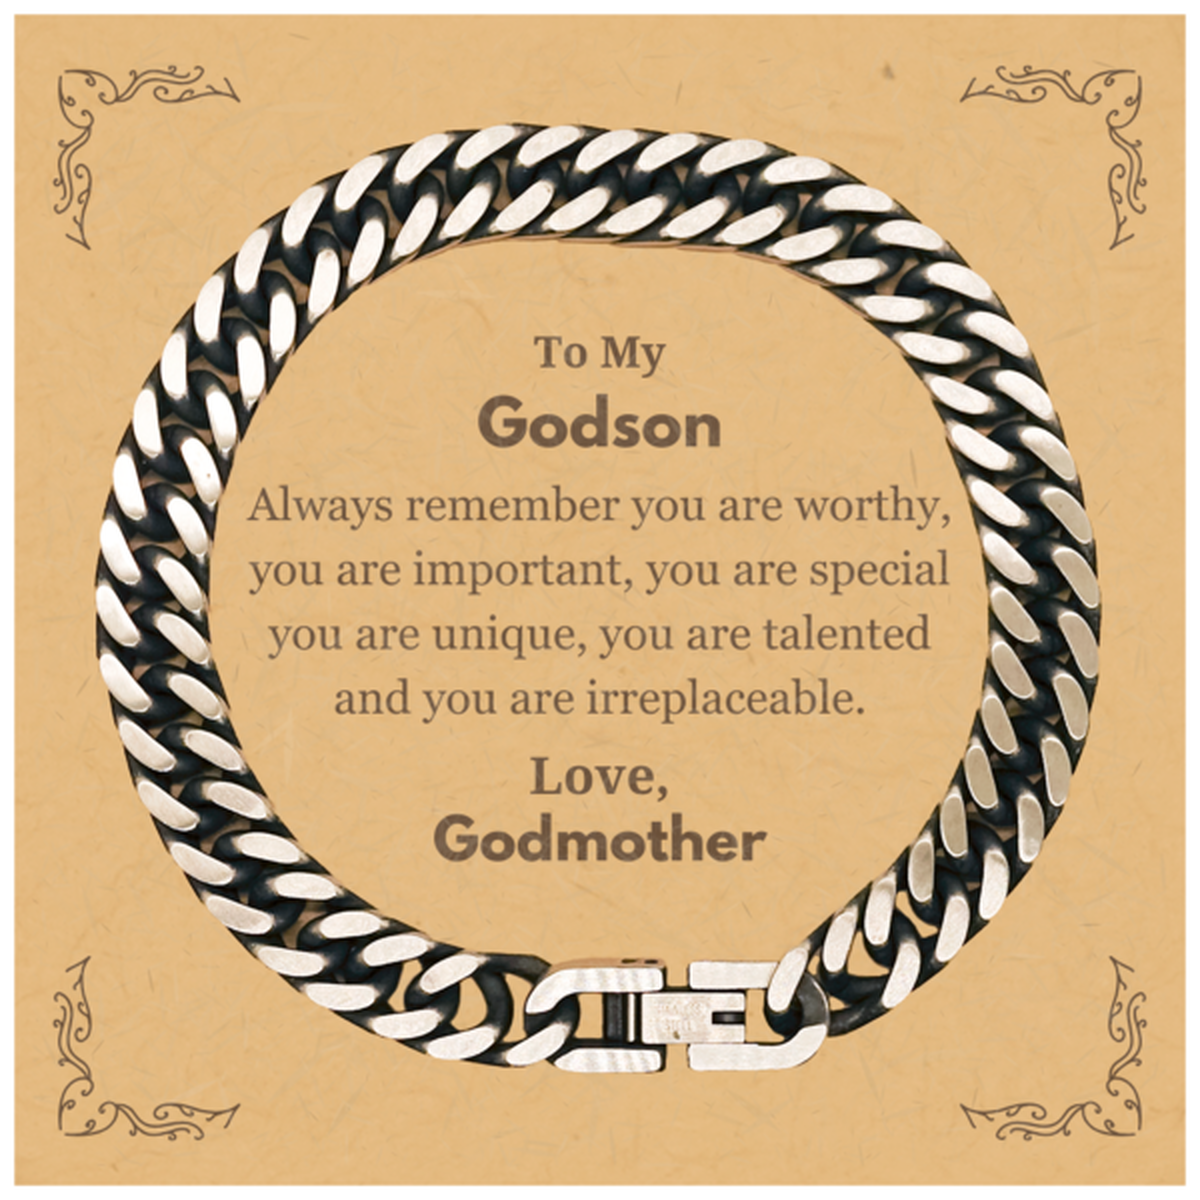 Godson Birthday Gifts from Godmother, Inspirational Cuban Link Chain Bracelet for Godson Christmas Graduation Gifts for Godson Always remember you are worthy, you are important. Love, Godmother